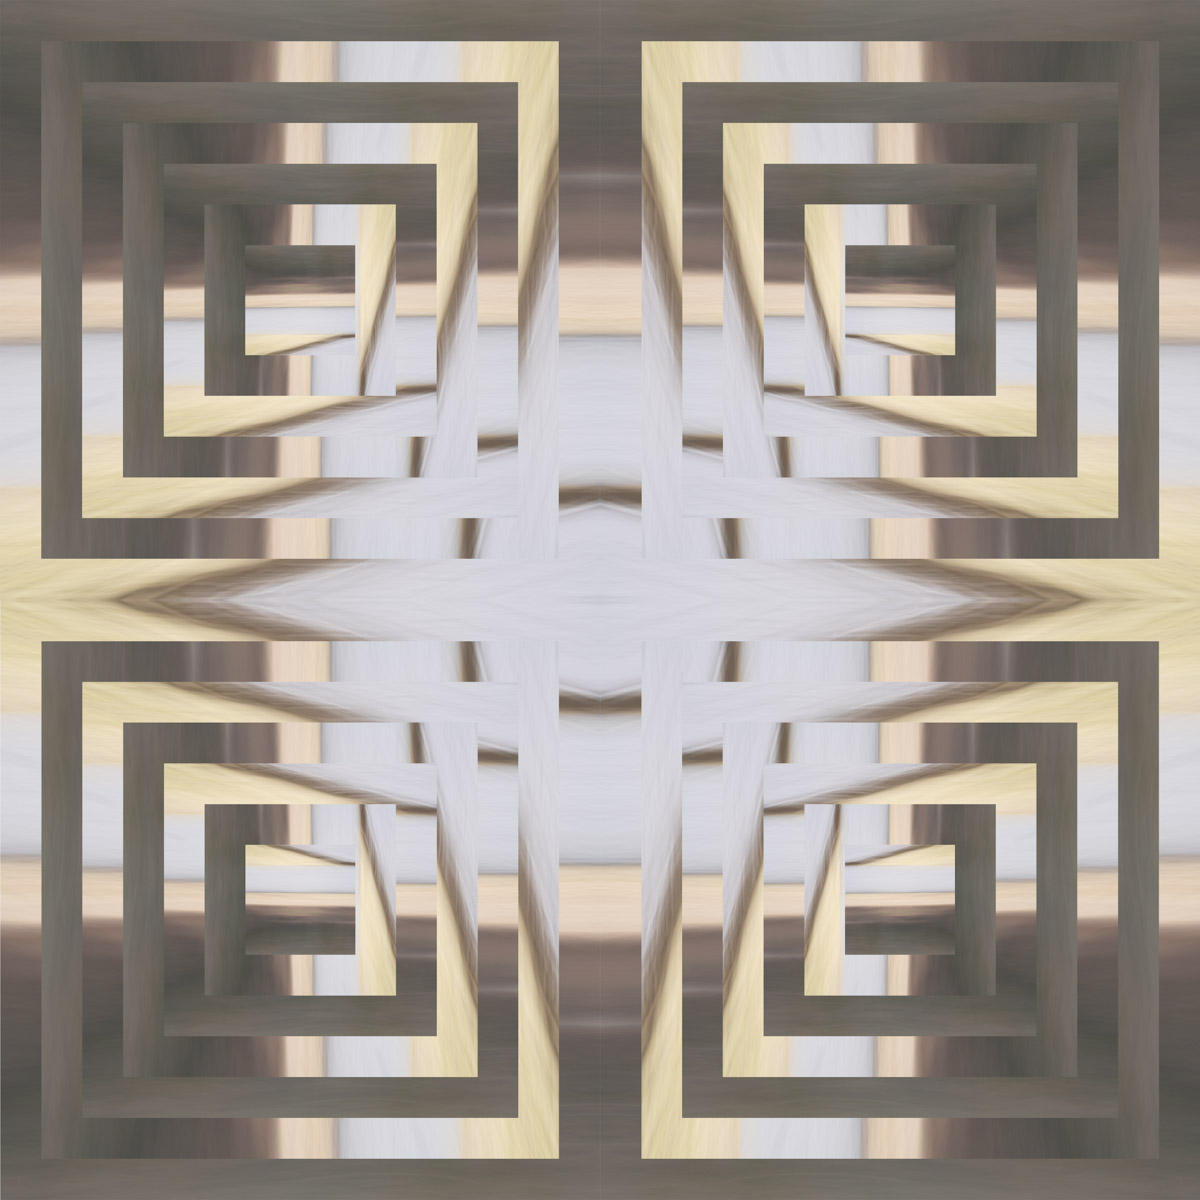 A square pattern with a gold and white background.